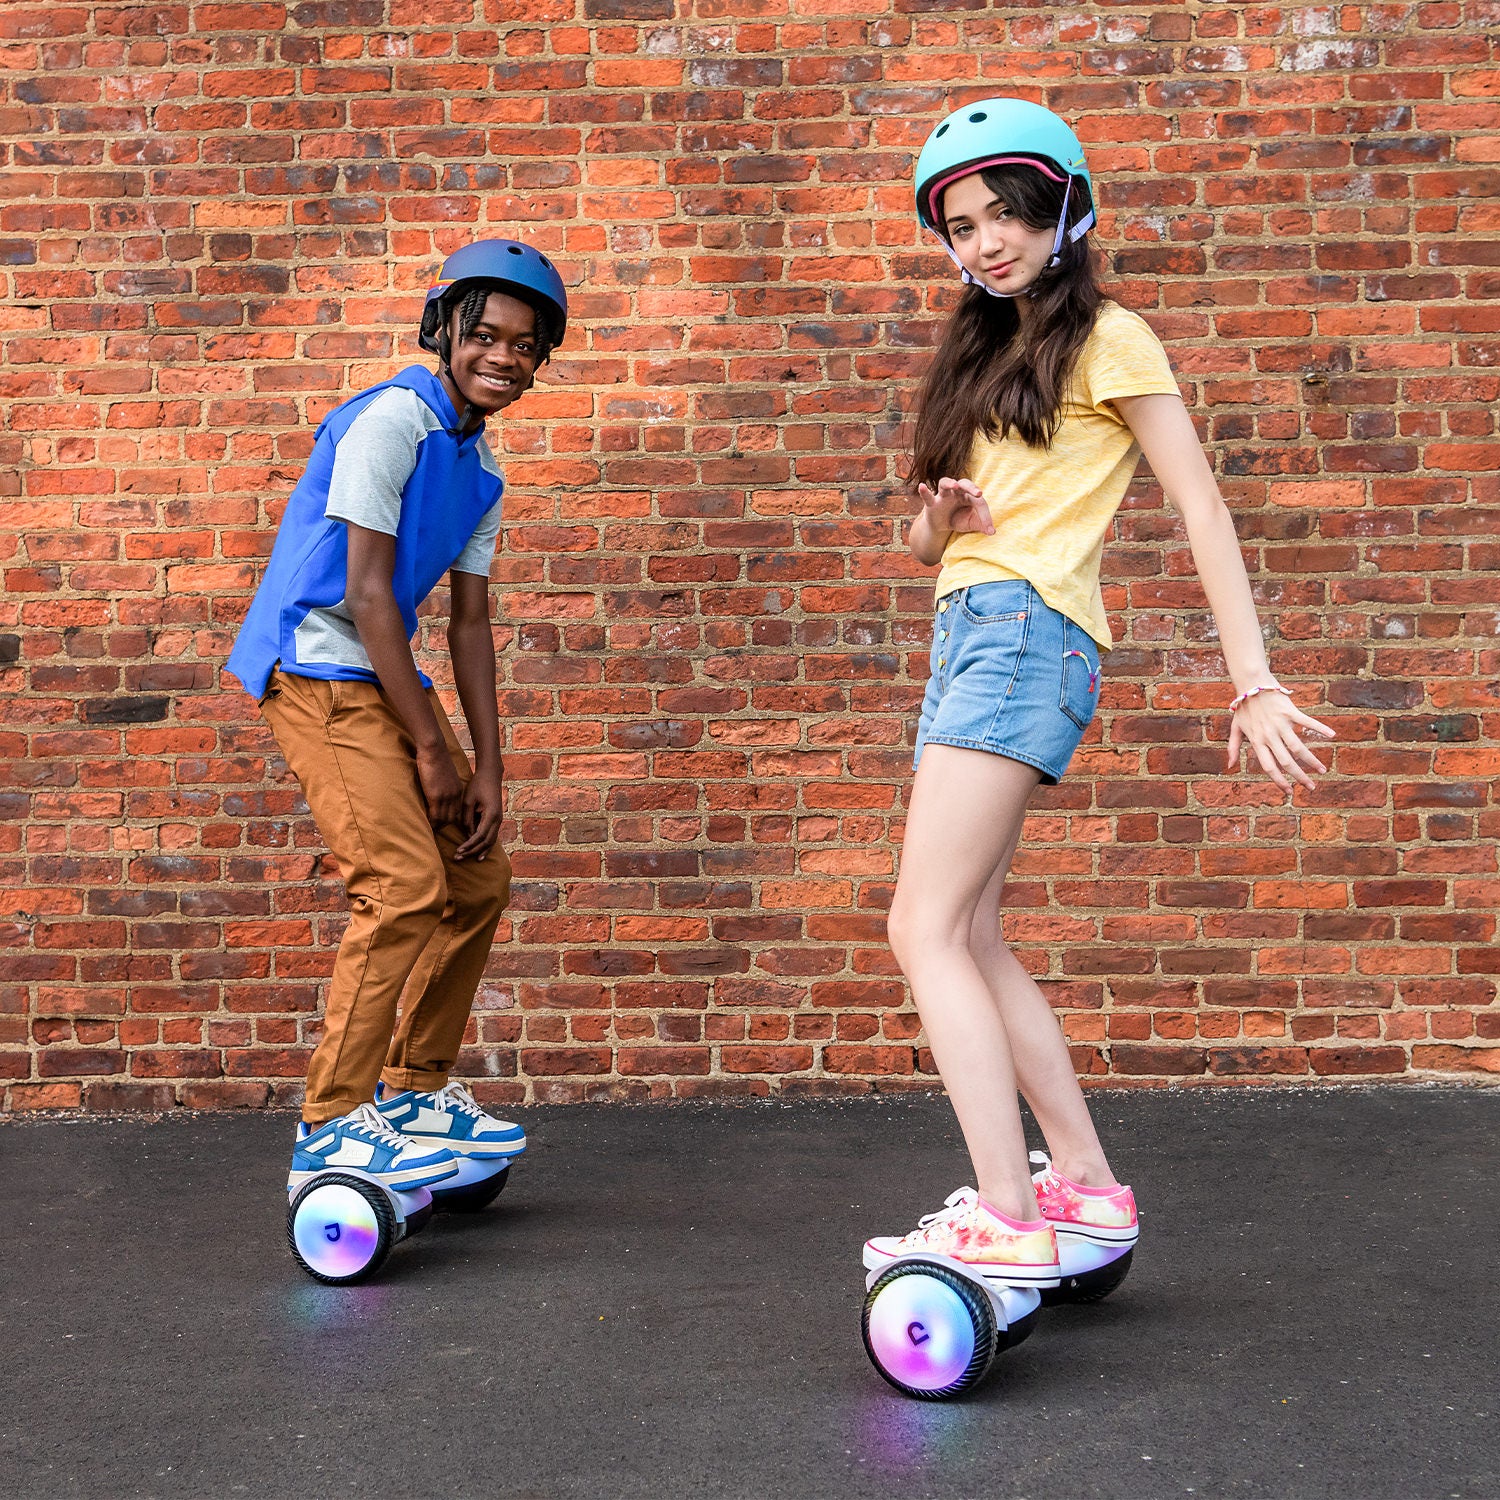 two young people having fun and riding on their Plasma X hoverboards on a street